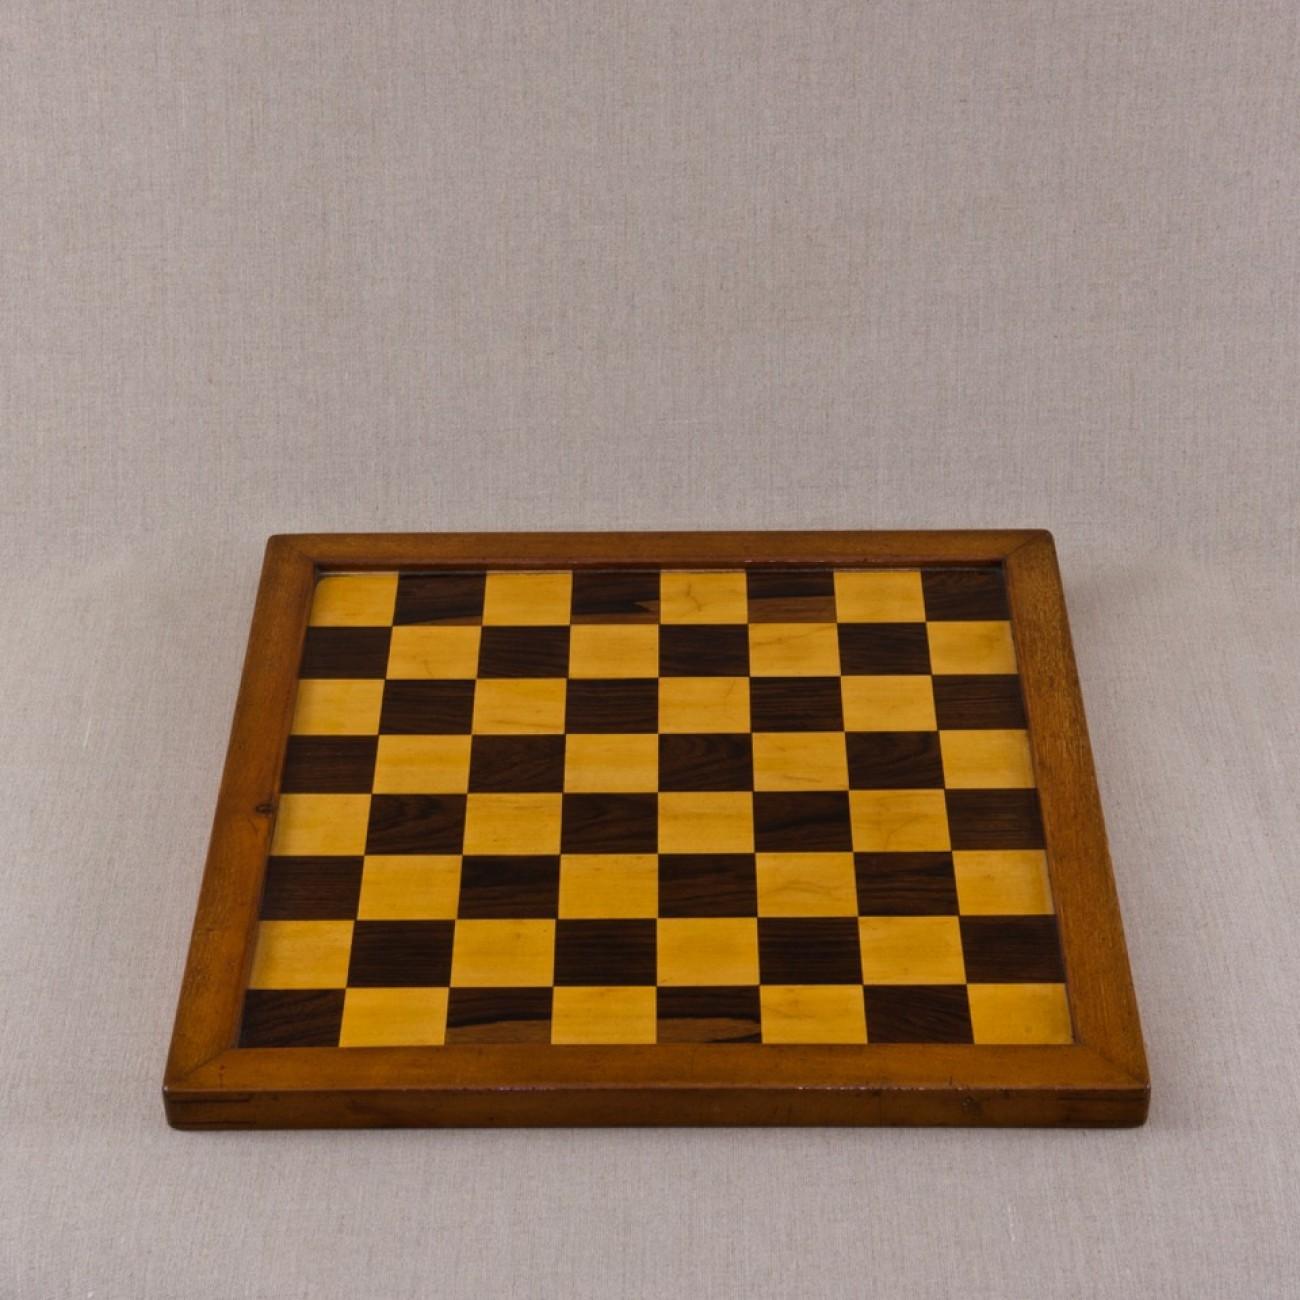 A fabulous smaller scale mahogany framed chess board with mahogany back and squares of satinwood and rosewood (probably made by Jaques of London but missing label), circa 1920.

Dimensions: 44.5 cm/17½ inches x 44.5 cm/17½ inches. Size of squares